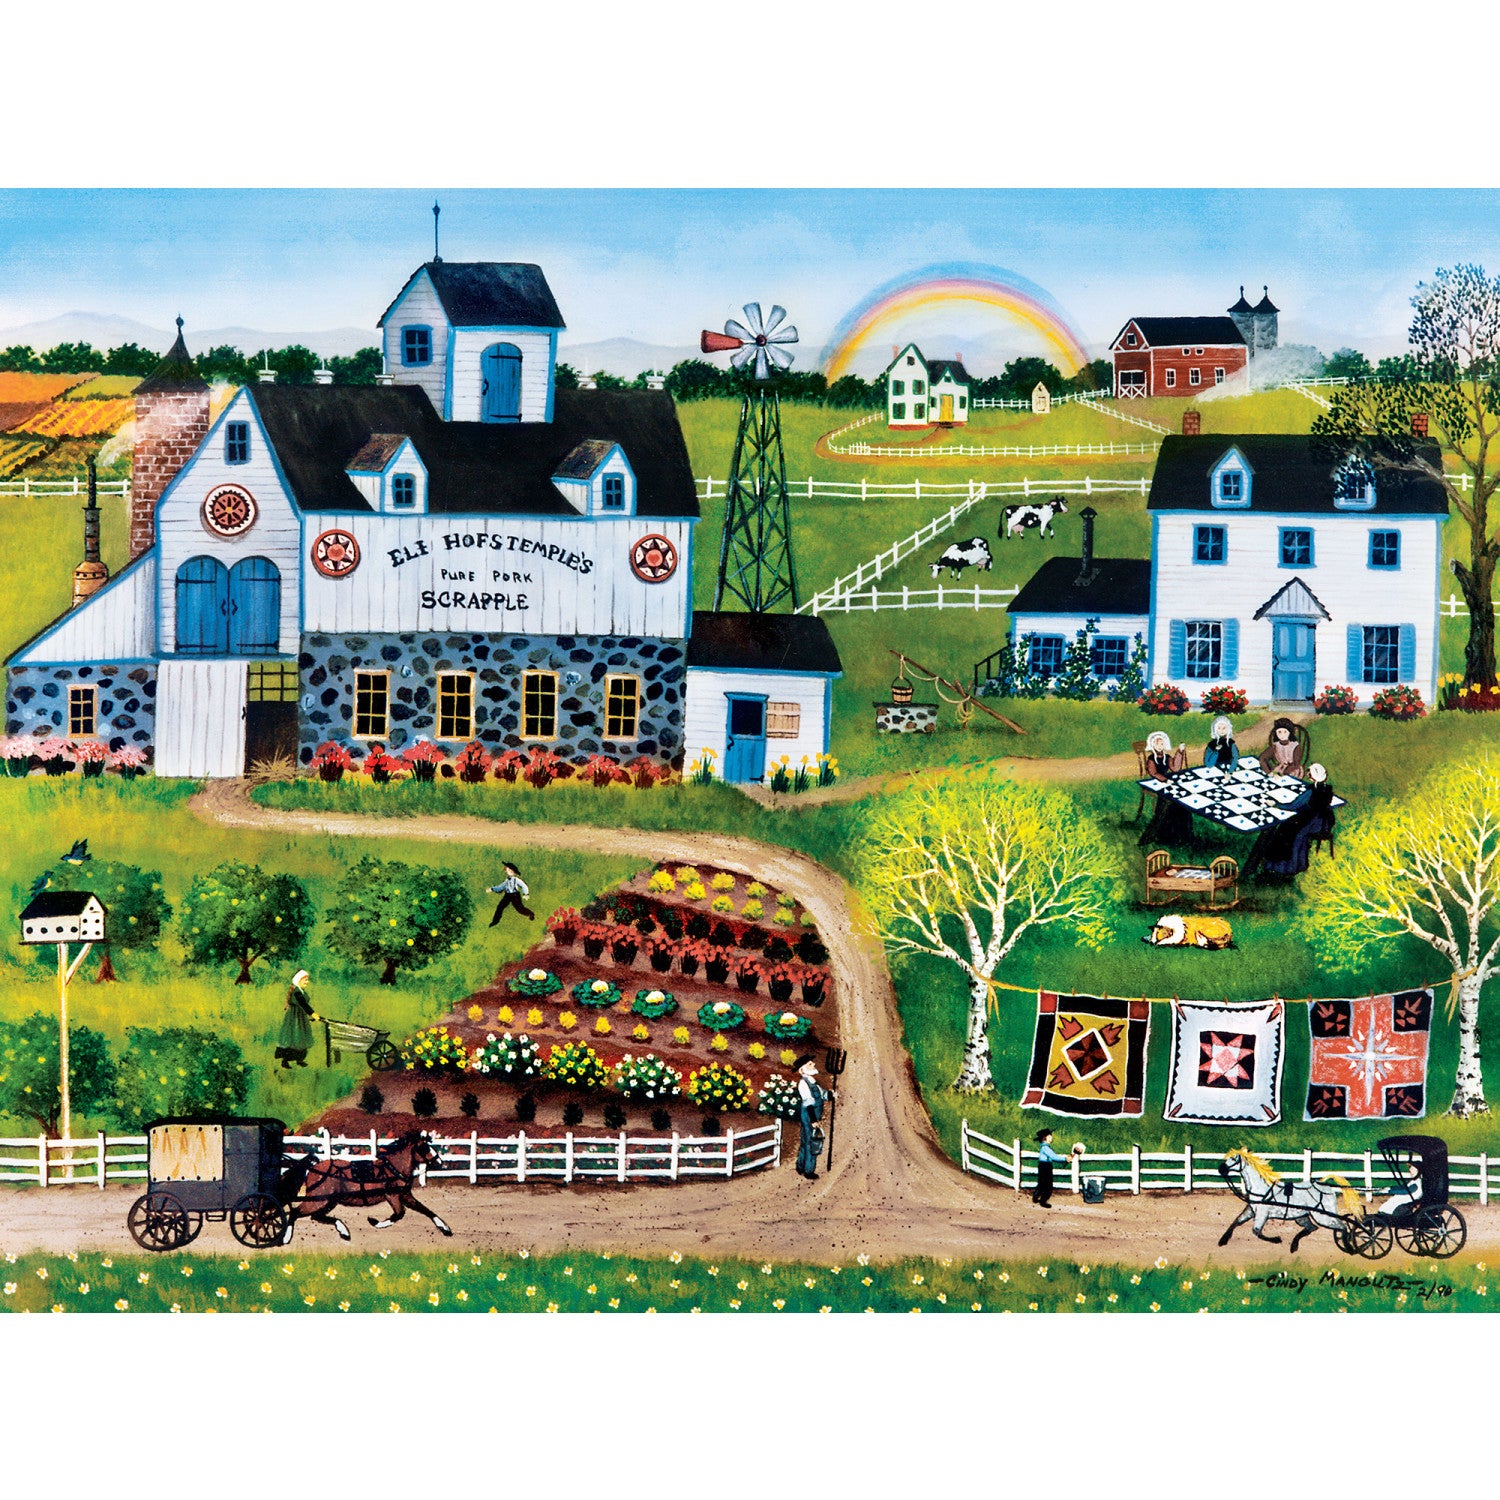 Homegrown - Amish Frolic 750 Piece Puzzle